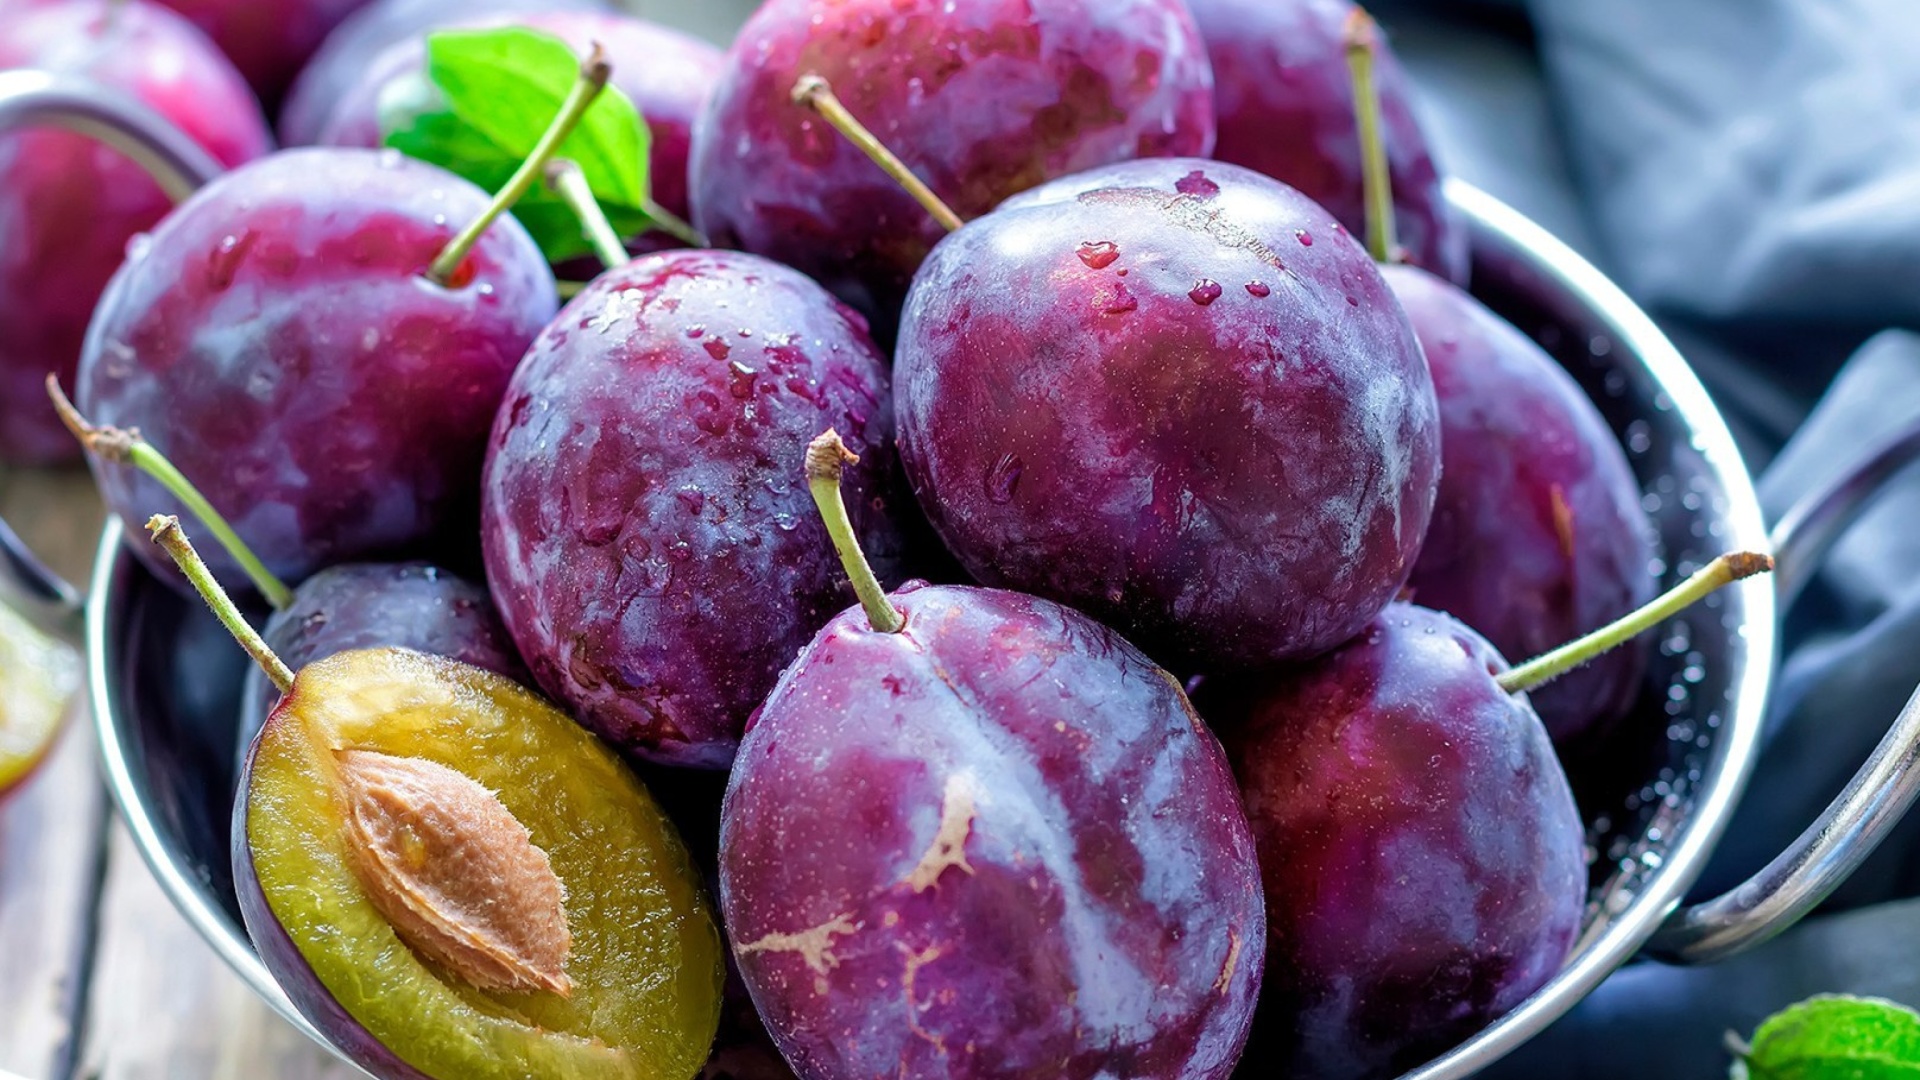 Plums with Vitamins wallpaper 1920x1080